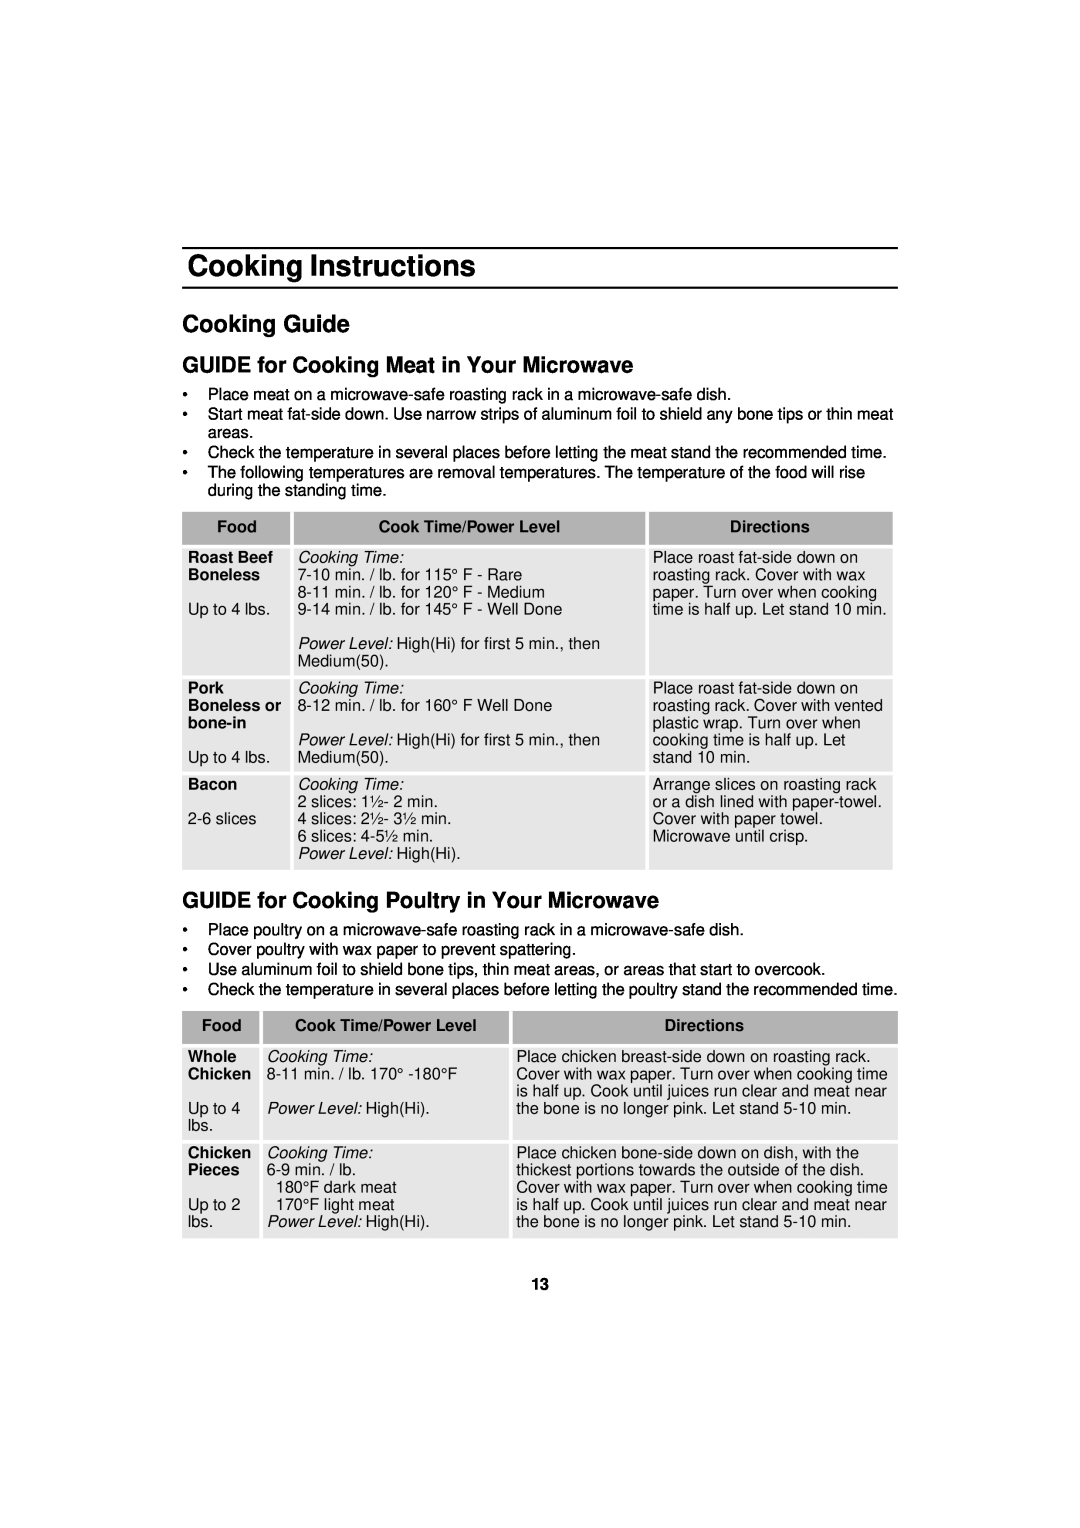 Samsung MW830WA Cooking Guide, GUIDE for Cooking Meat in Your Microwave, GUIDE for Cooking Poultry in Your Microwave 